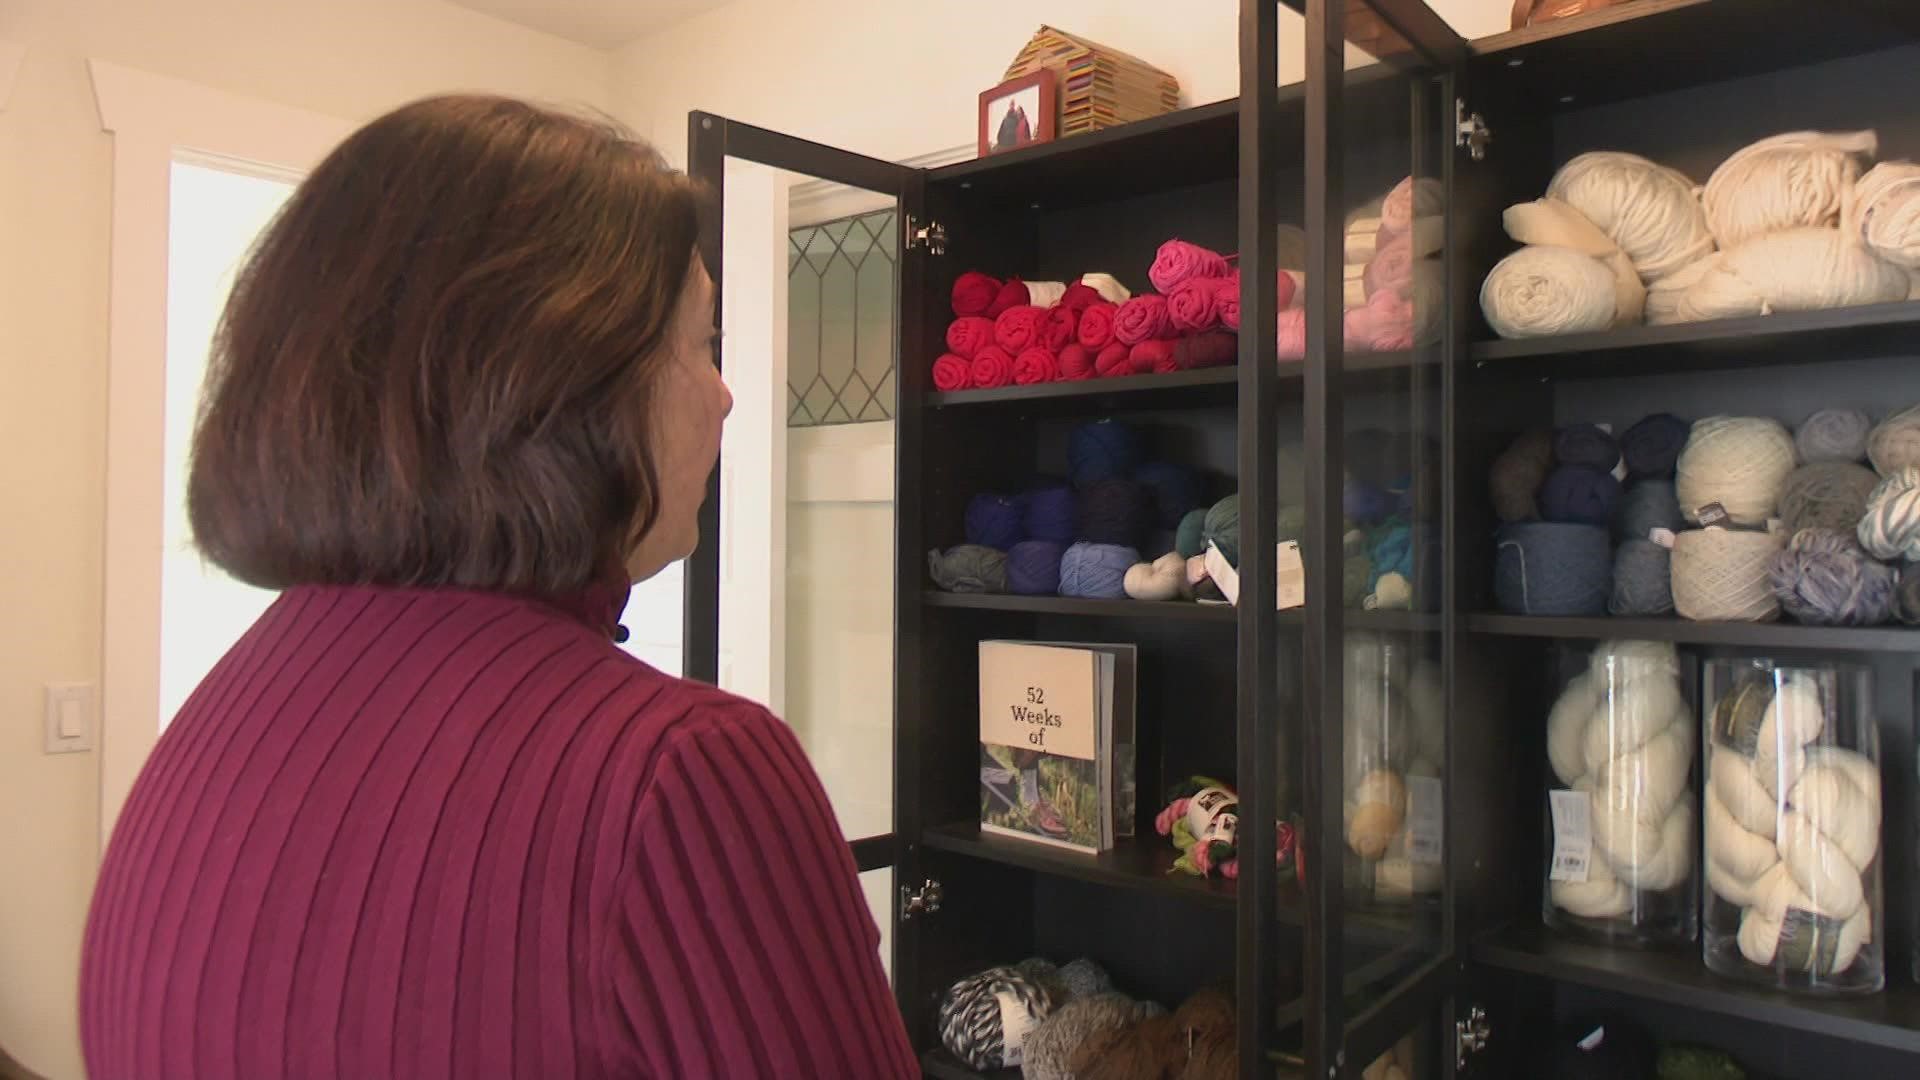 A Seattle woman created an organization dedicated to helping people complete unfinished projects left behind by loved ones.